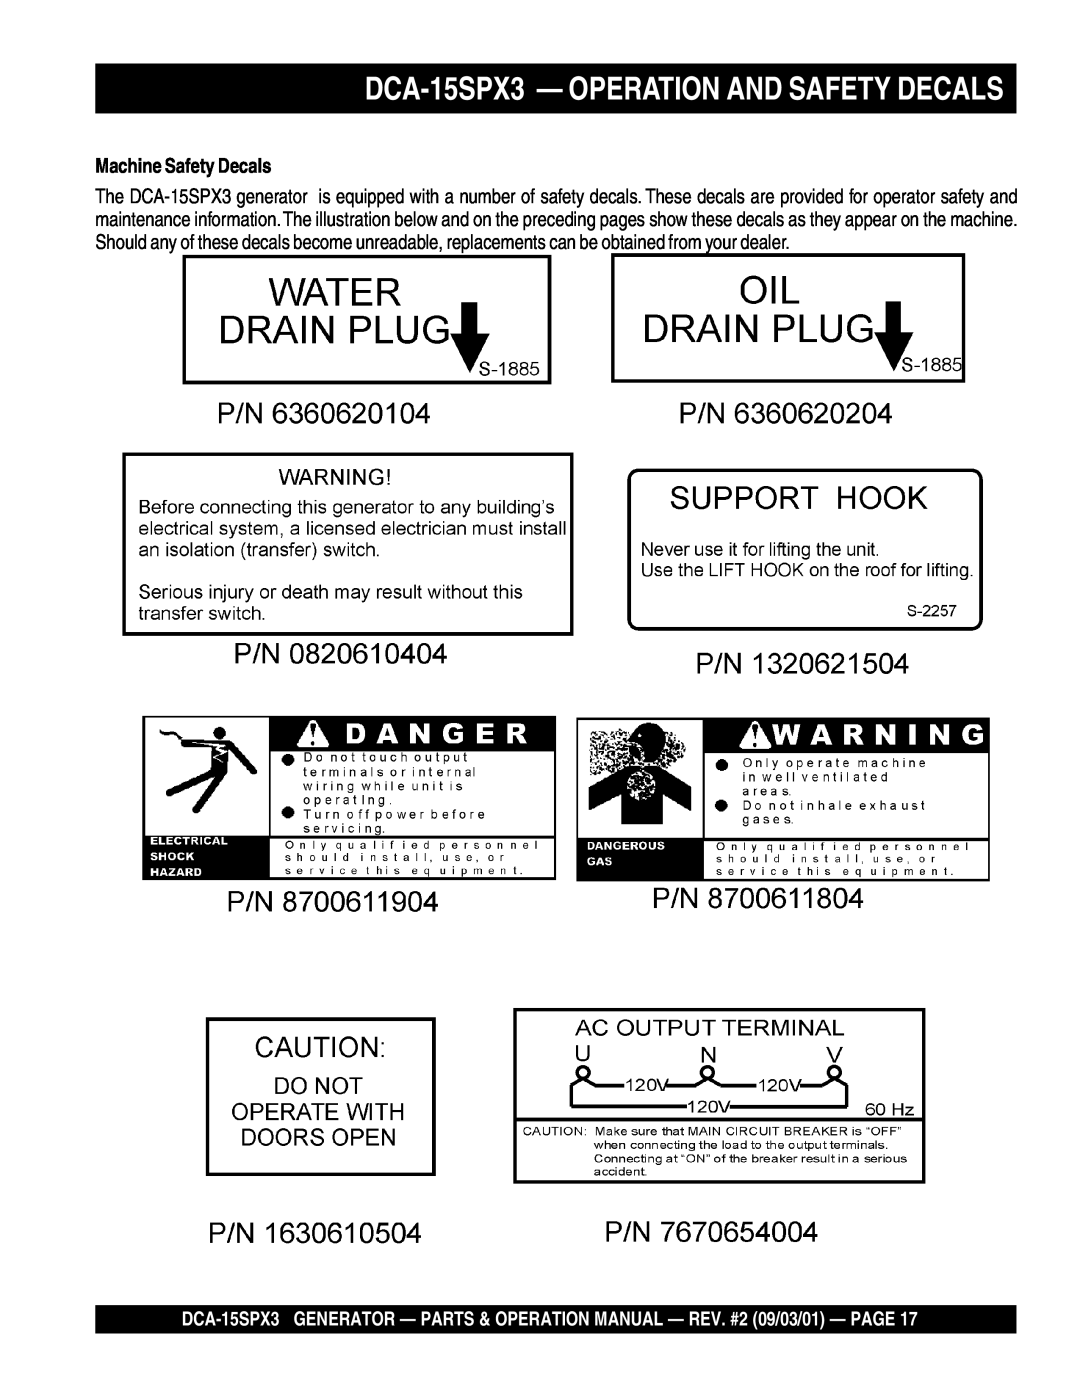 Multiquip operation manual DCA-15SPX3— OPERATION AND SAFETY DECALS, Machine Safety Decals 